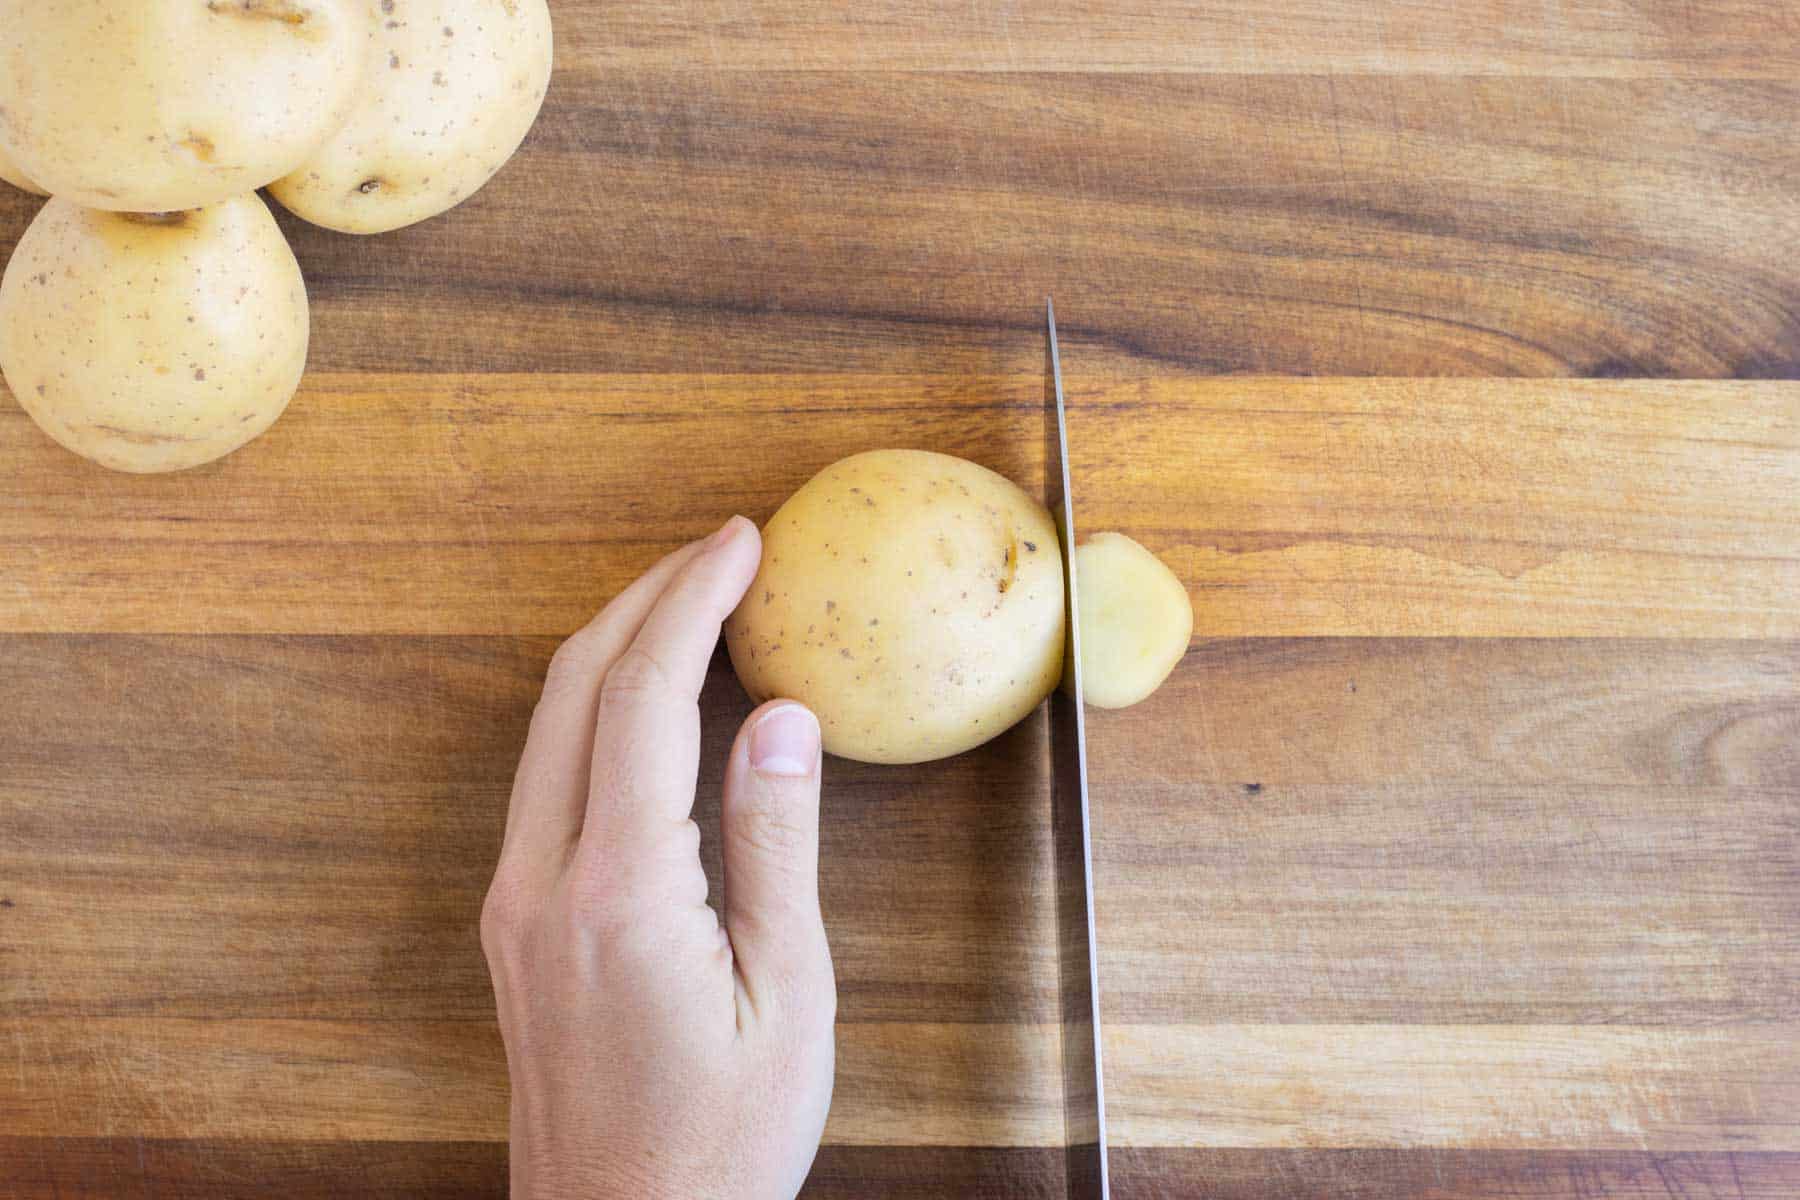 A knife slices the end off of a potato.